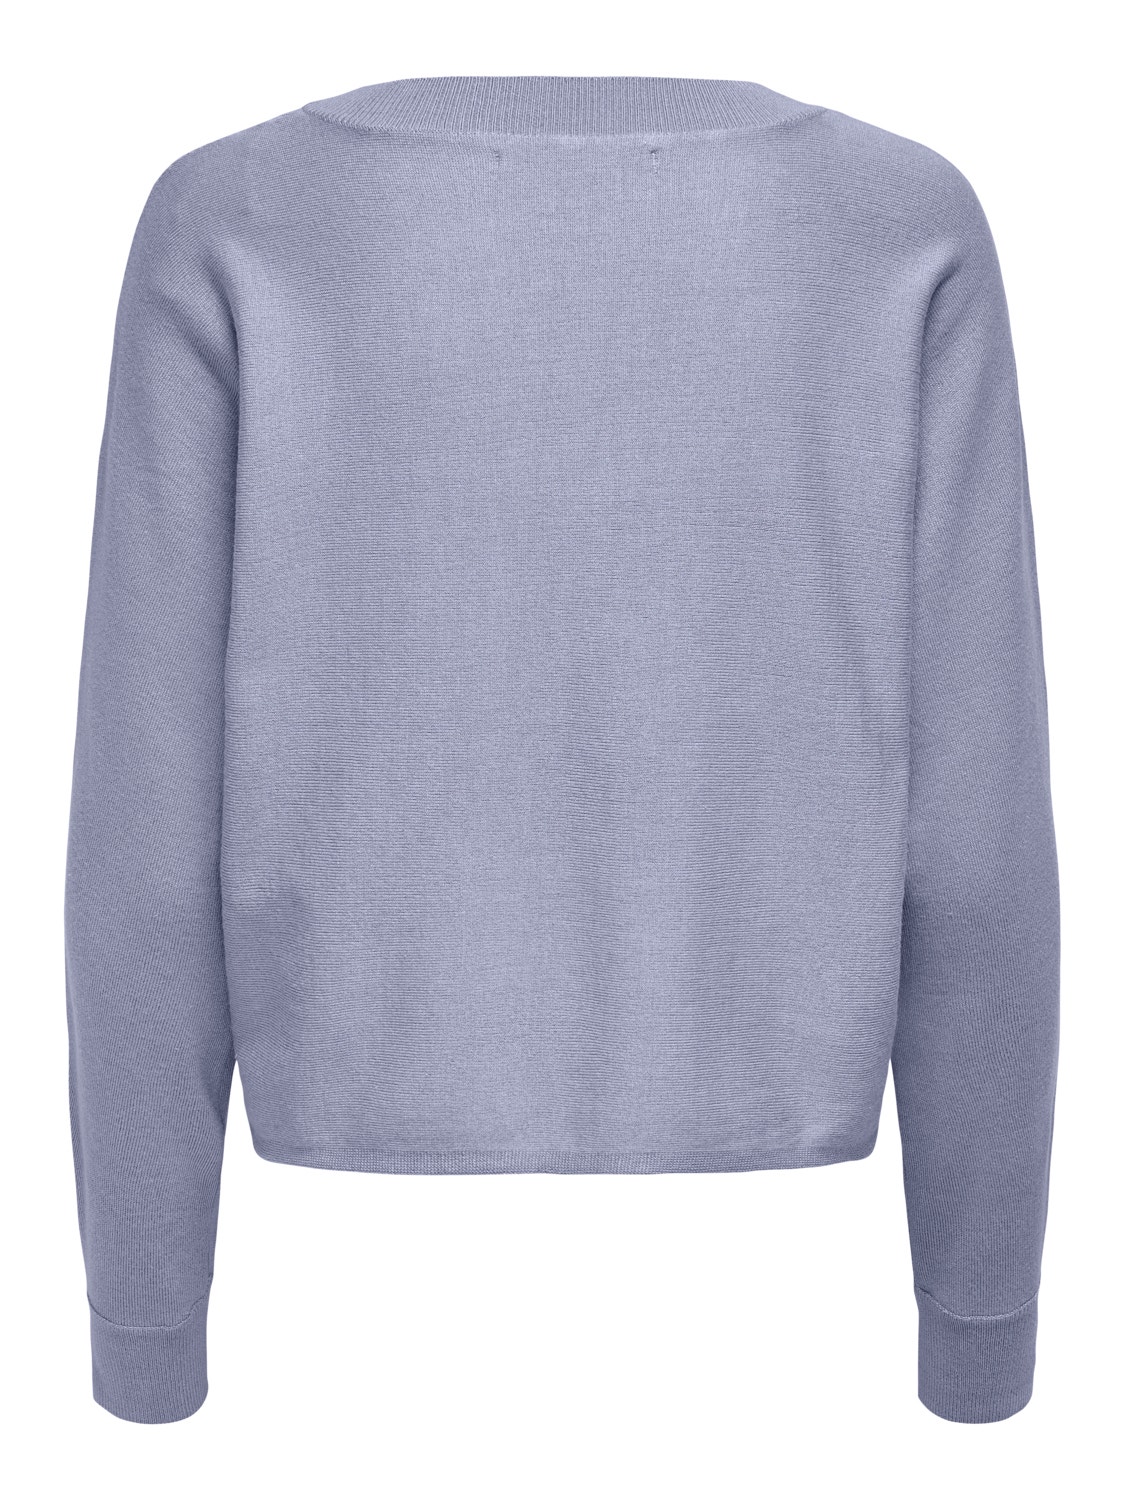 ONLY Rundhals Pullover -Eventide - 15246089